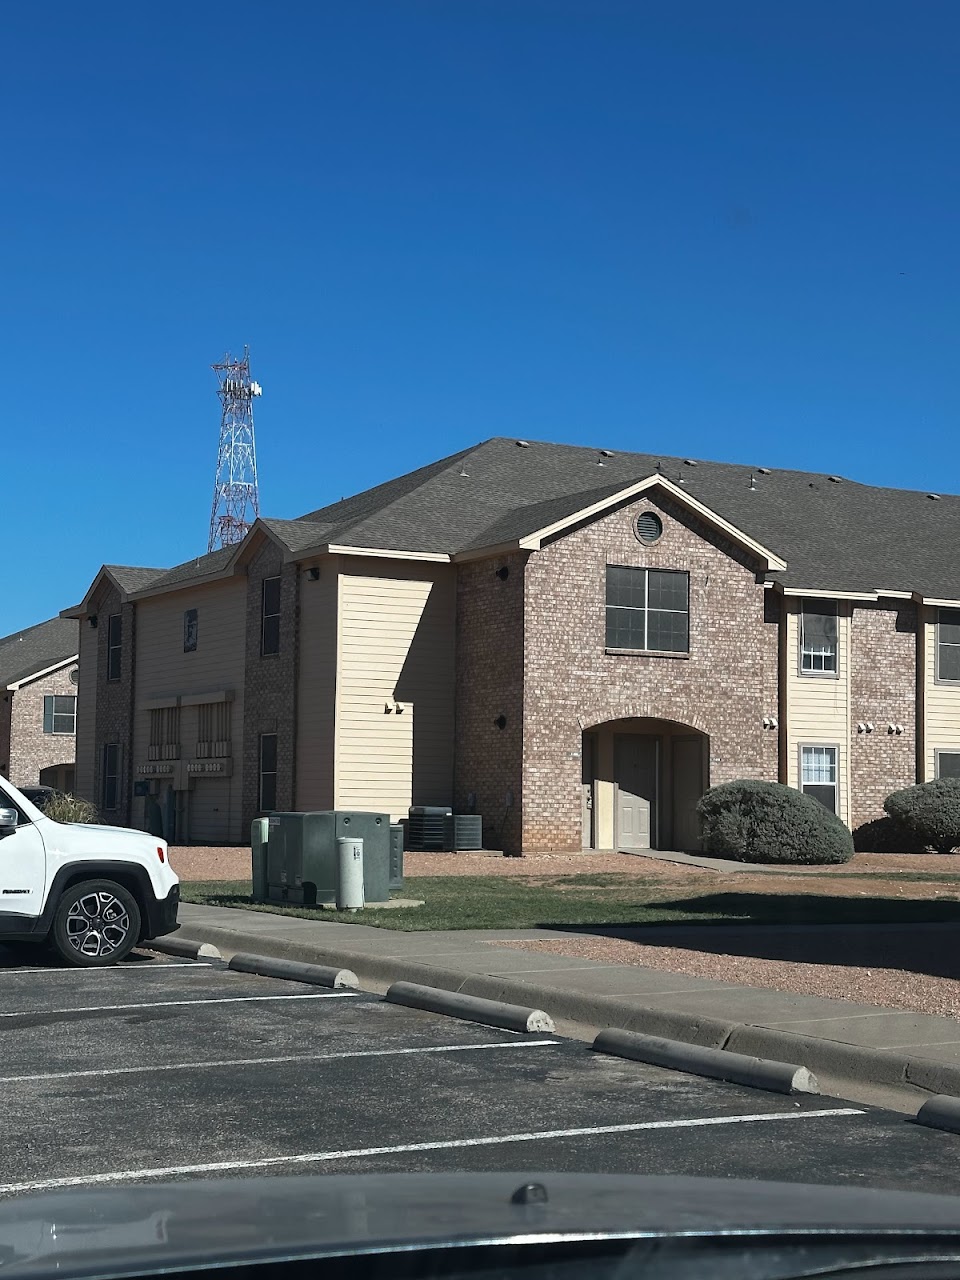 Photo of PARK GLEN APTS. Affordable housing located at 2300 CAMP DR MIDLAND, TX 79701